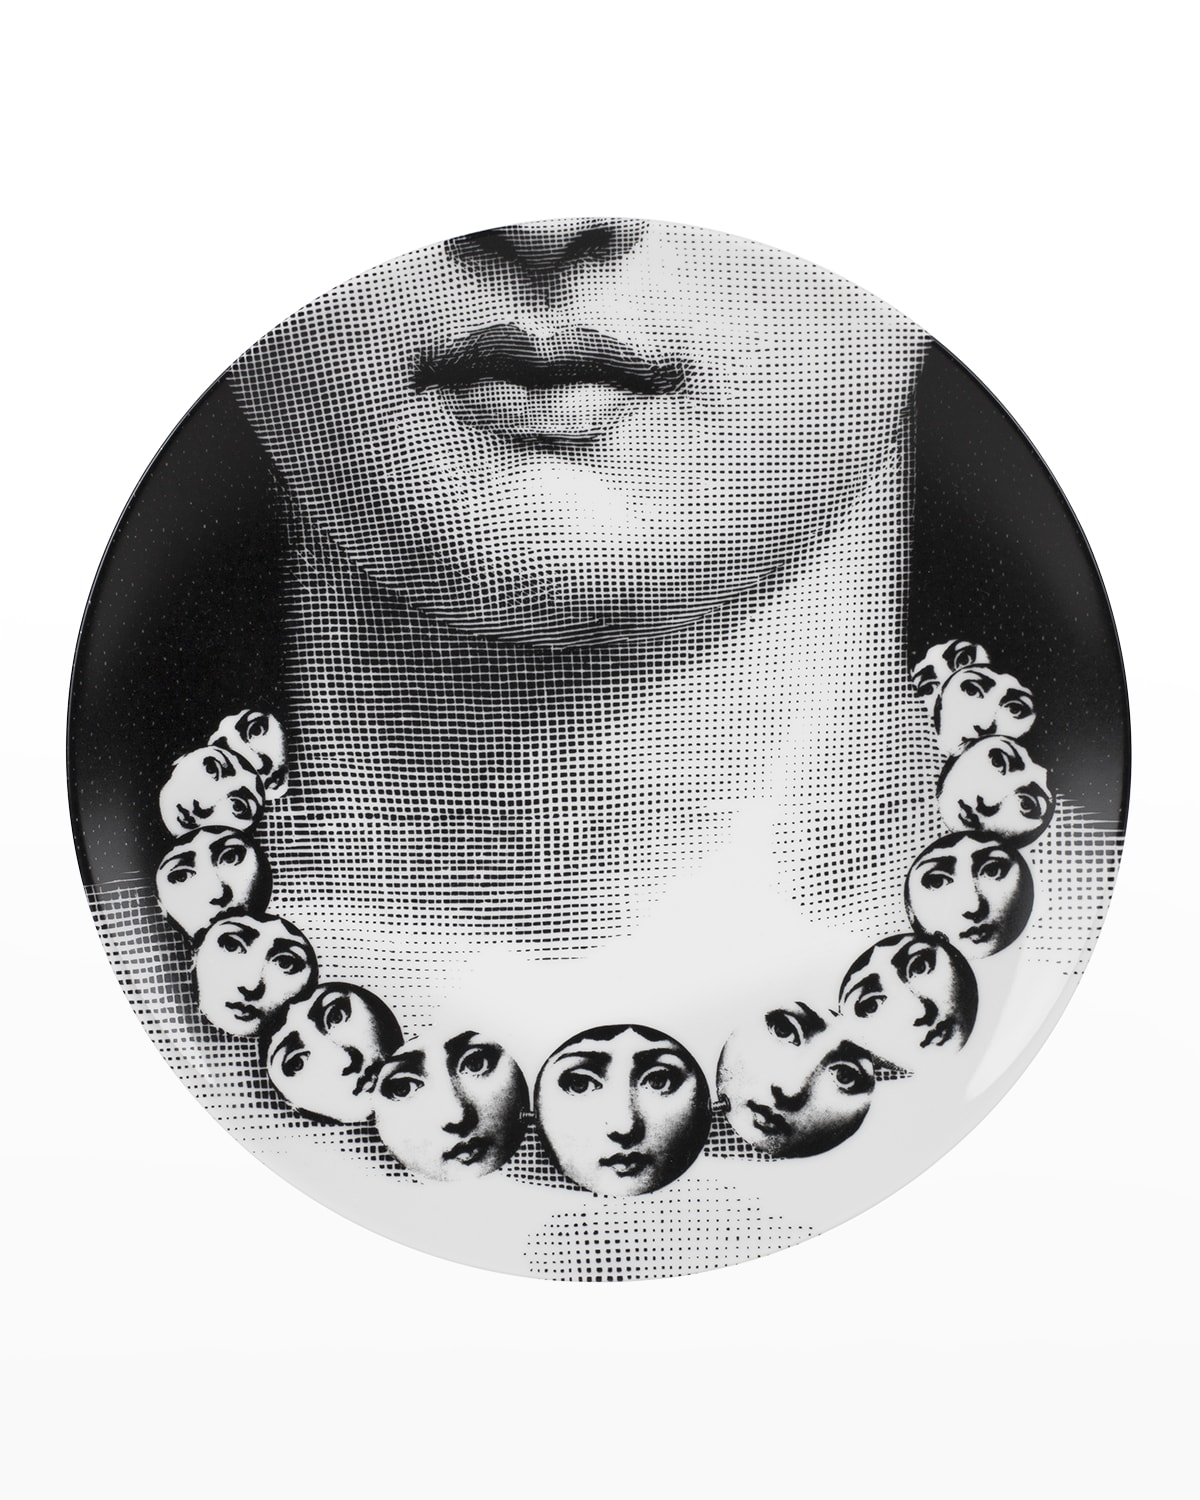 Fornasetti Tema E Variazioni N. 107 Necklace Made Of Faces Wall Plate In Black/white